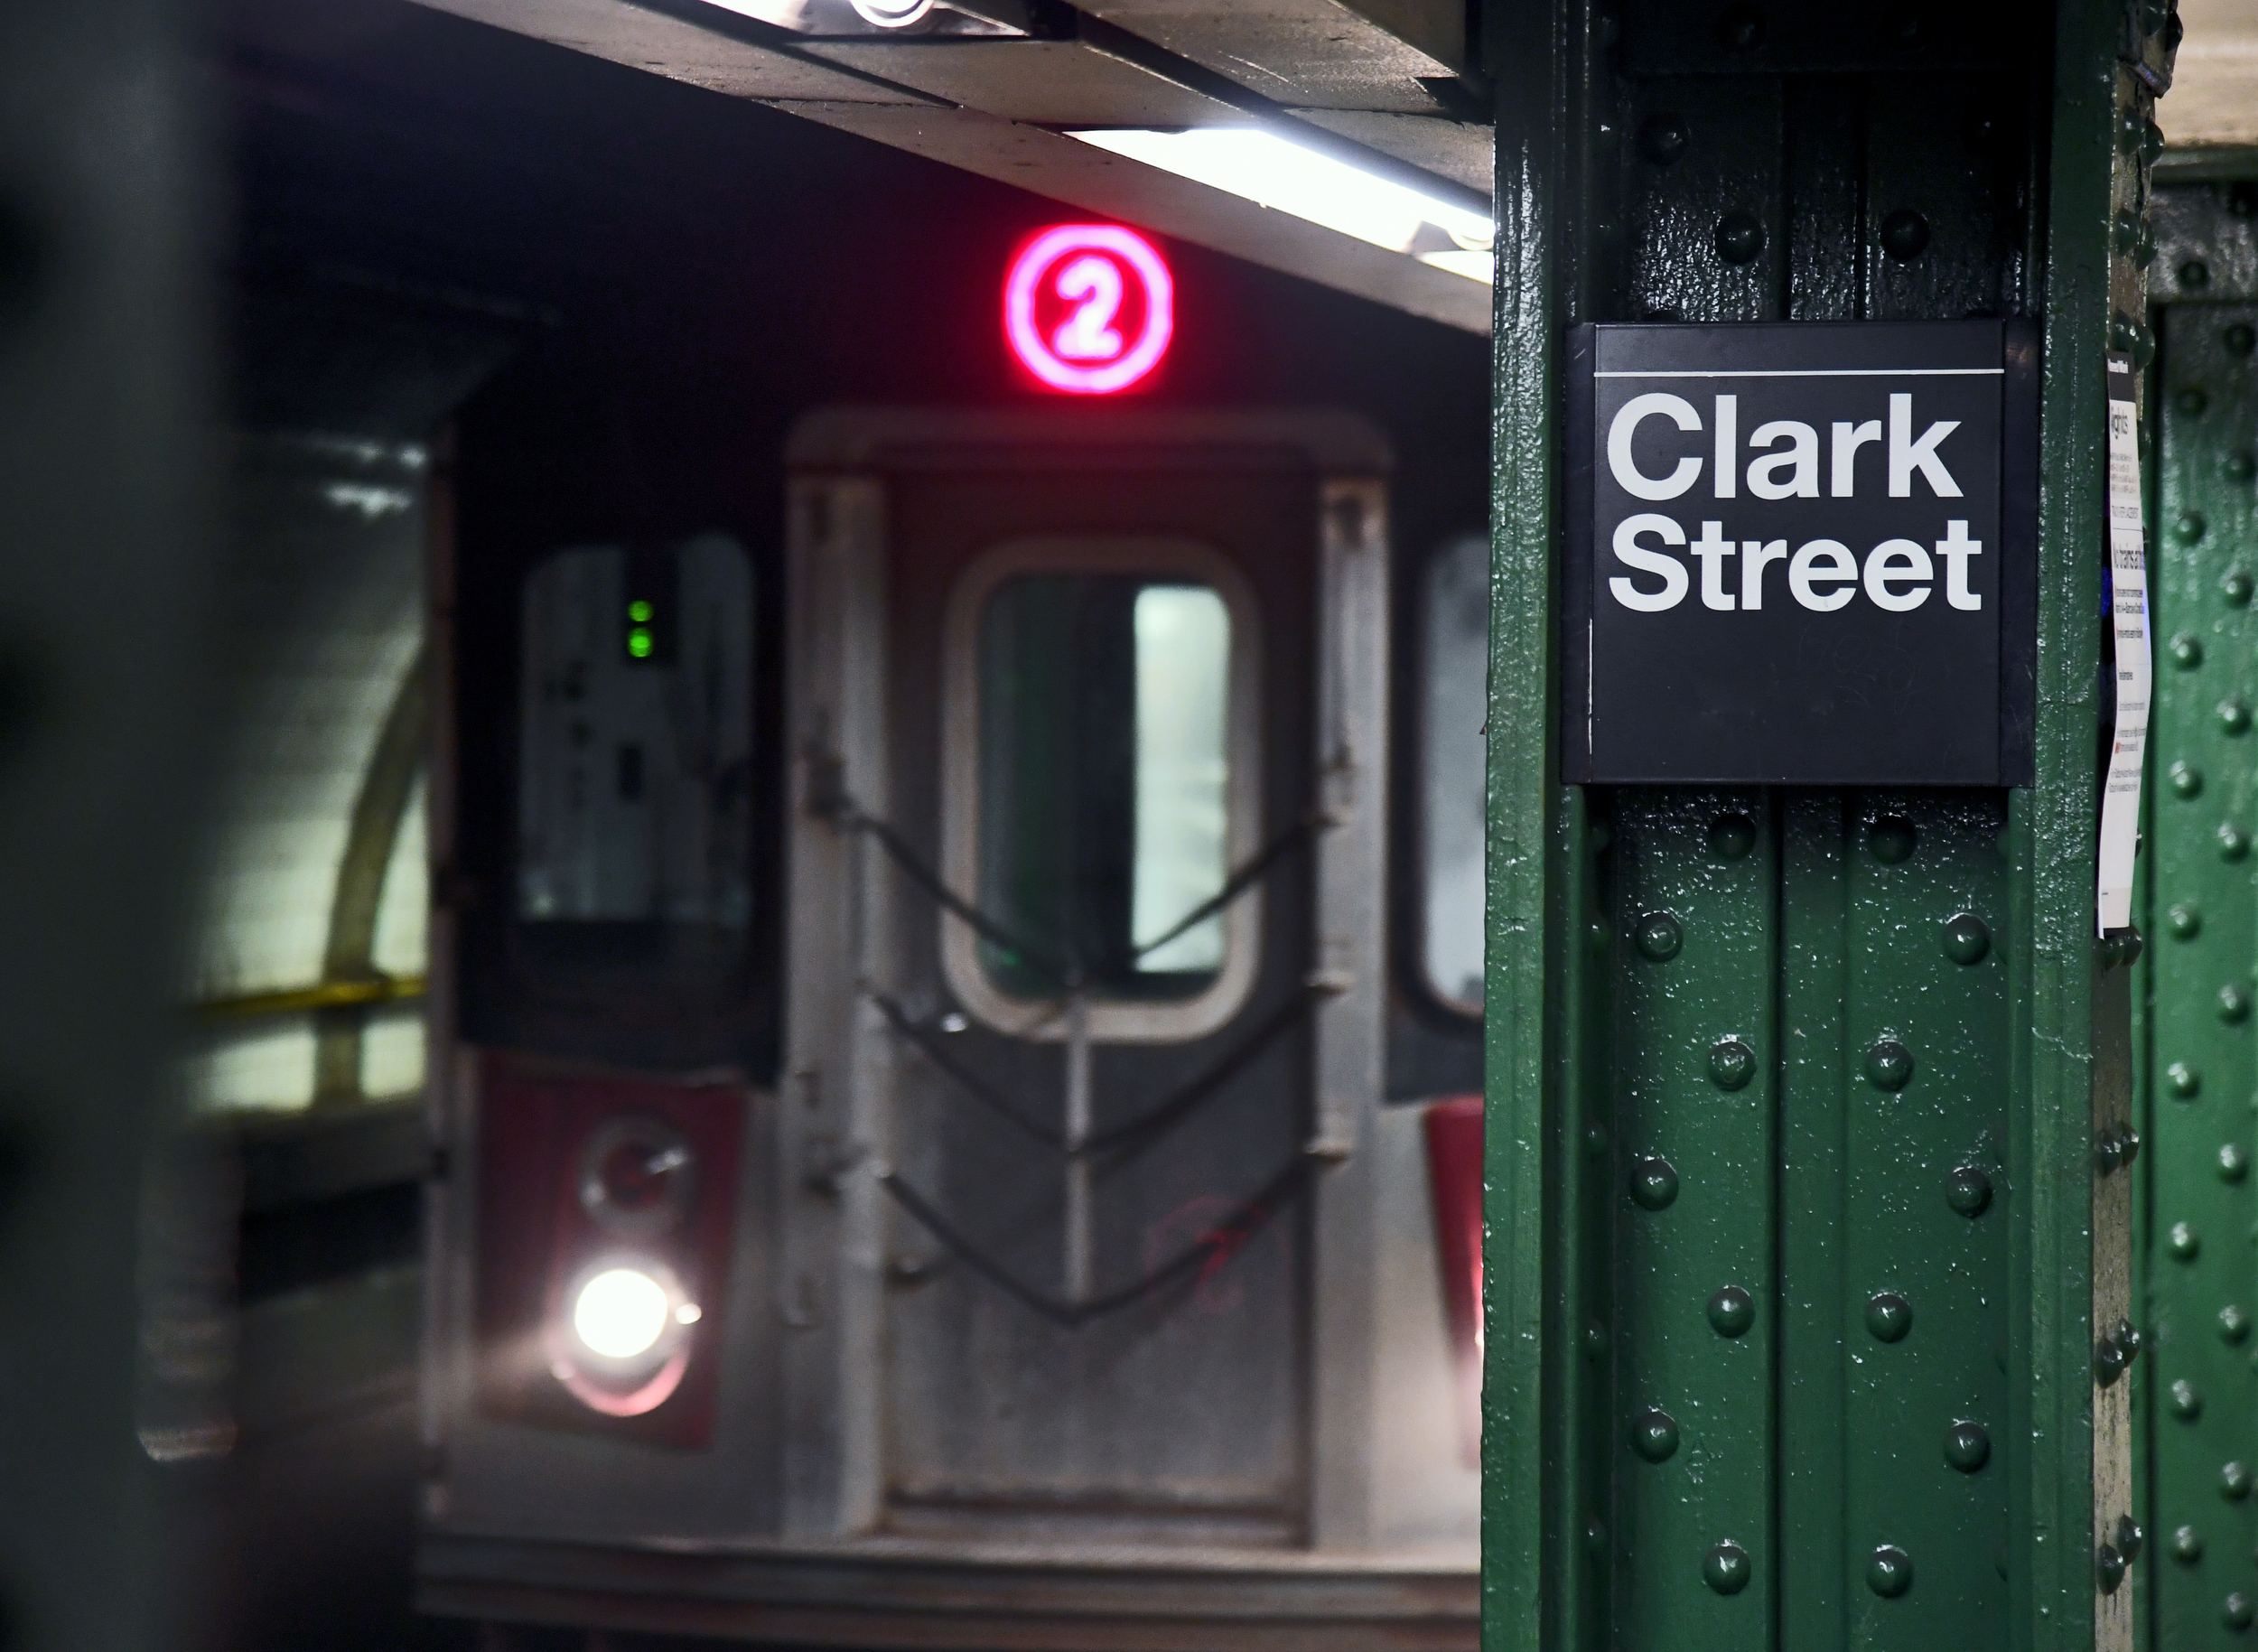 MTA Announces Reopening of Clark Street 2/3 Station Following Conclusion of Elevator Replacement Work